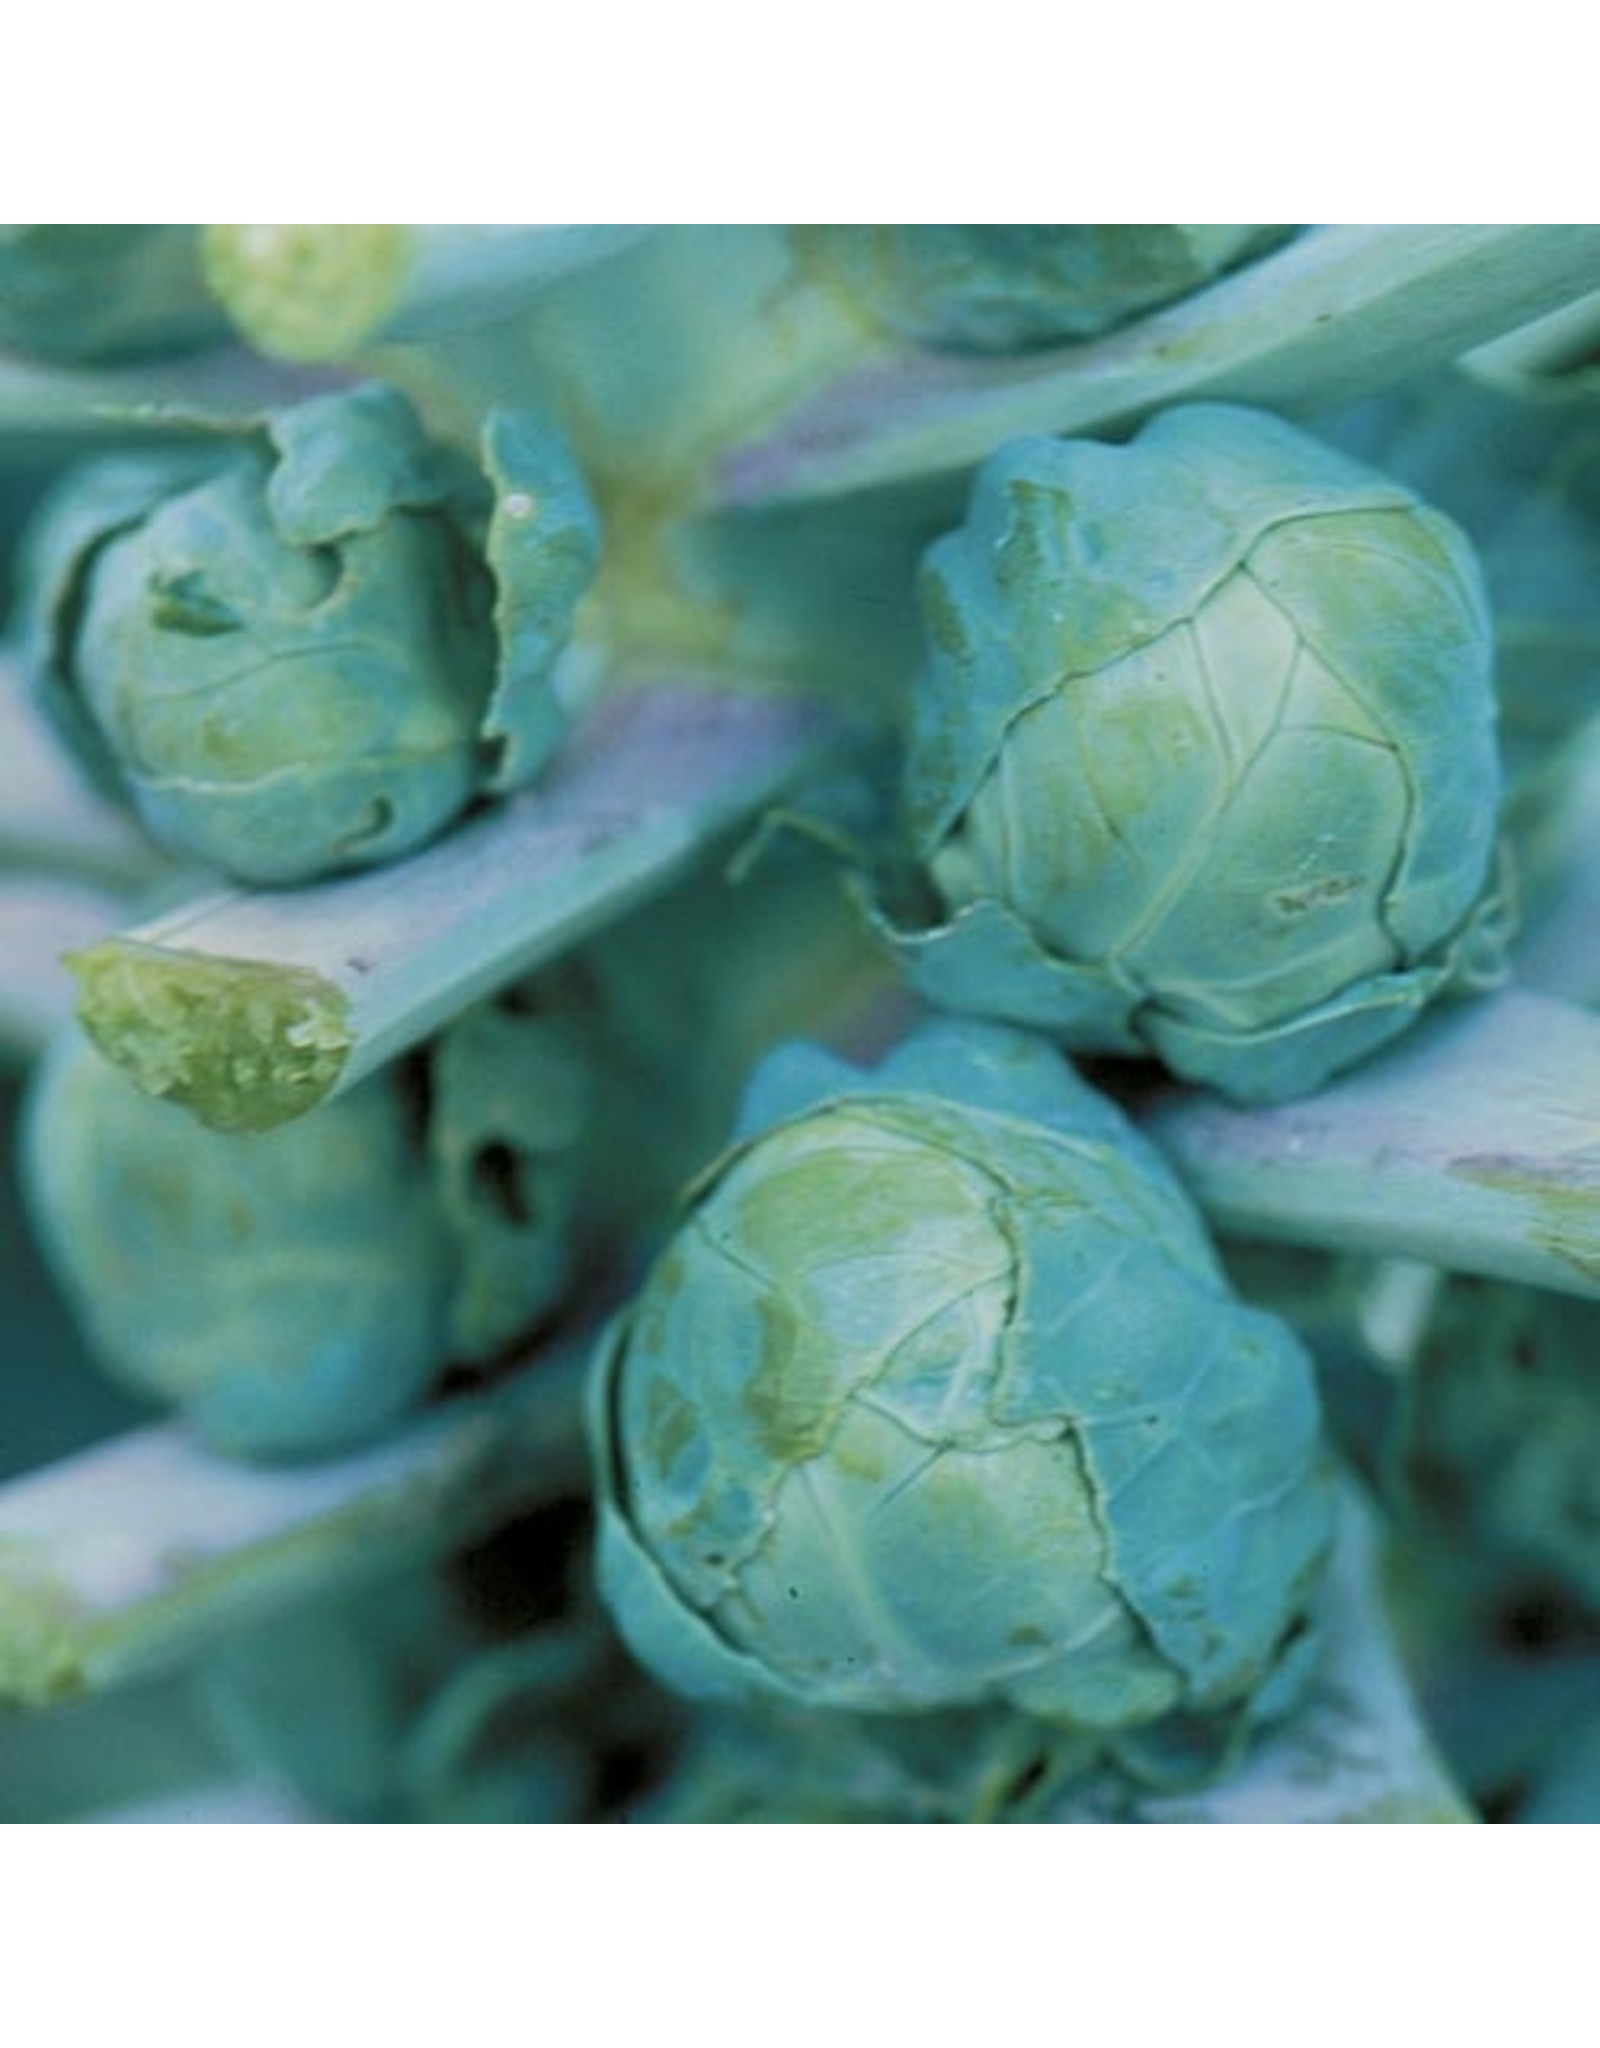 Seed Savers Brussels Sprouts - Long Island Improved